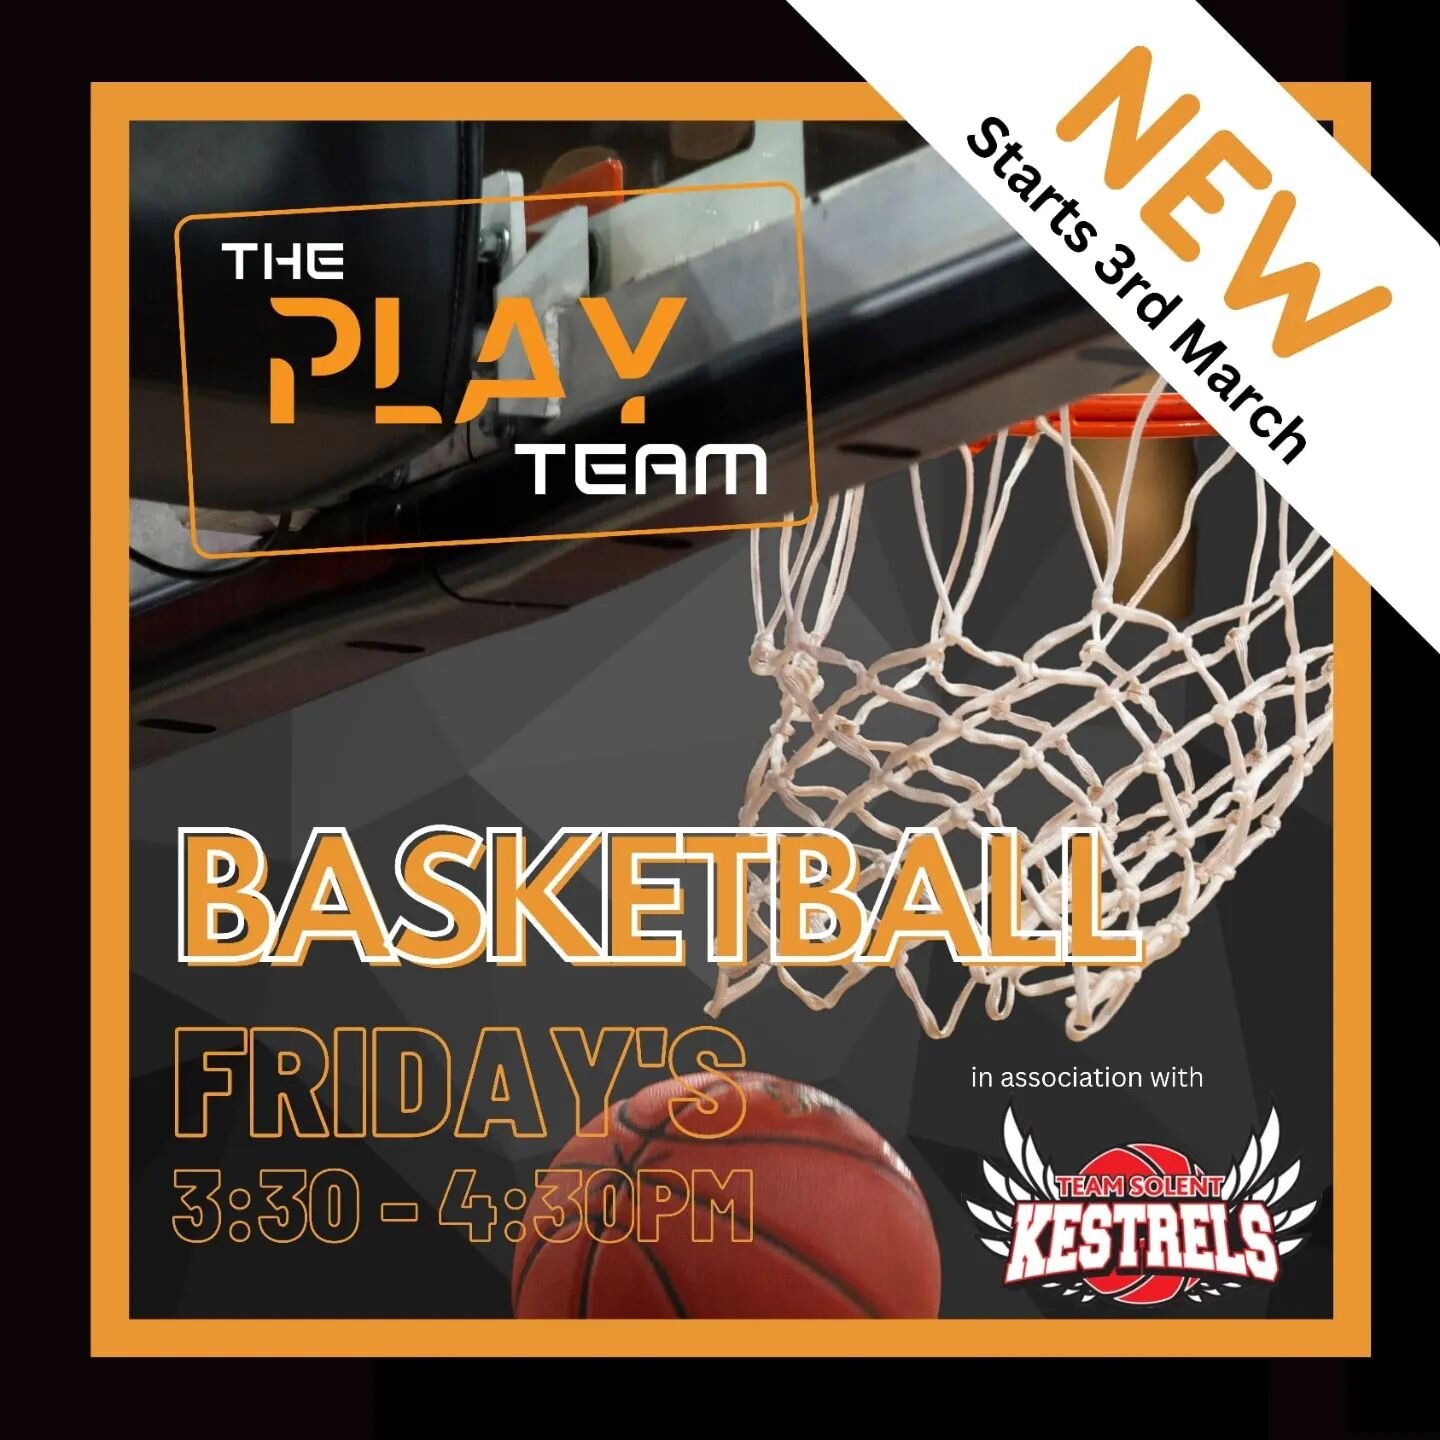 🔥 NEW AFTER SCHOOL CLUB 🔥

We are pleased to announce plans for a new after-school club at Fair Oak Junior School.

Working in association with Solent Kestrels, we will be launching a Basketball club on Friday 3rd March 2023 - as with all clubs